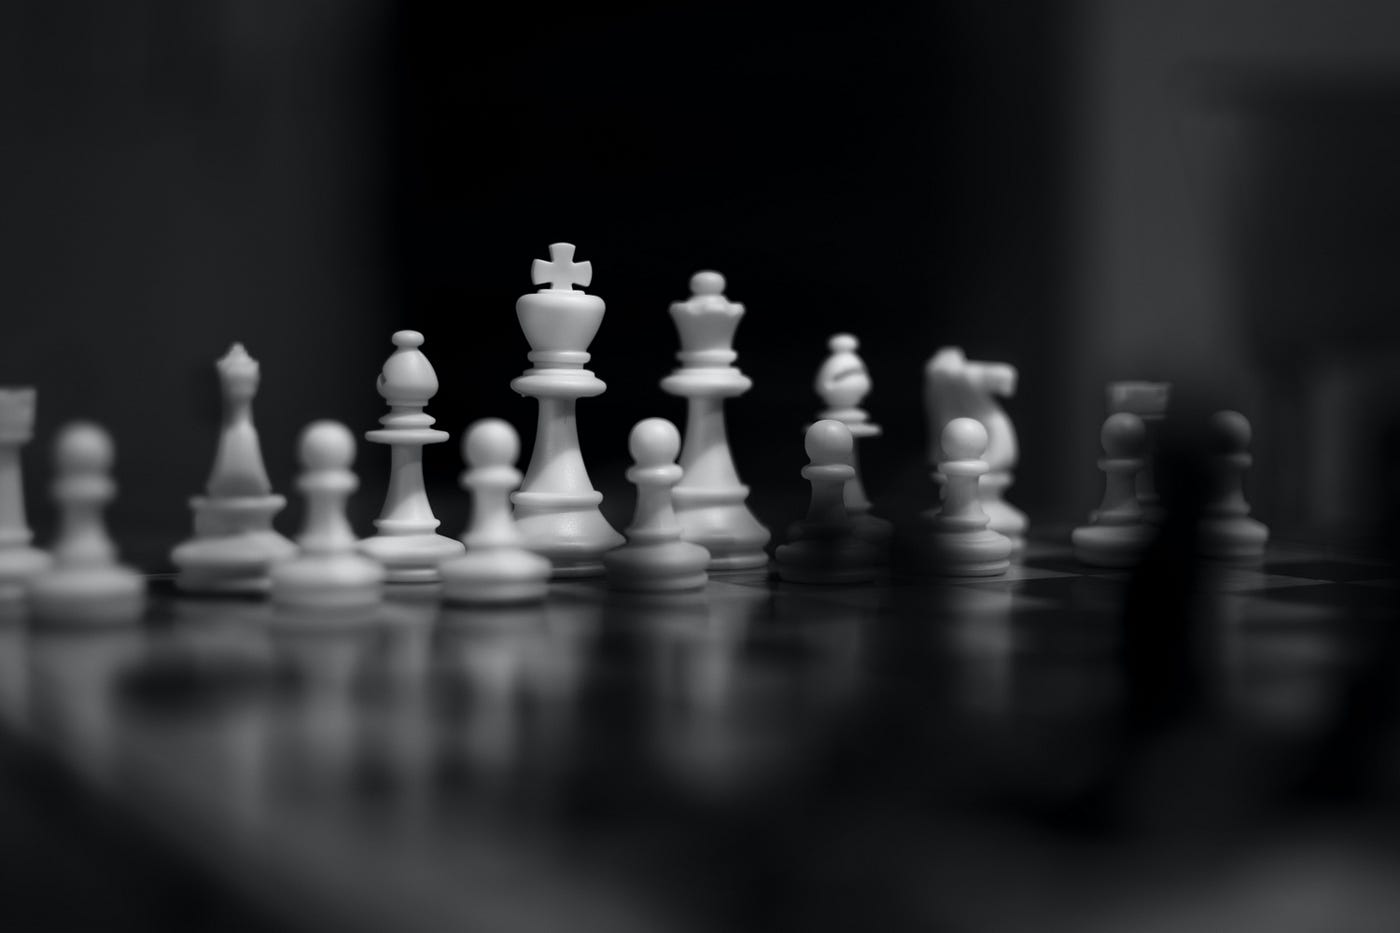 c++ read pgn chess game